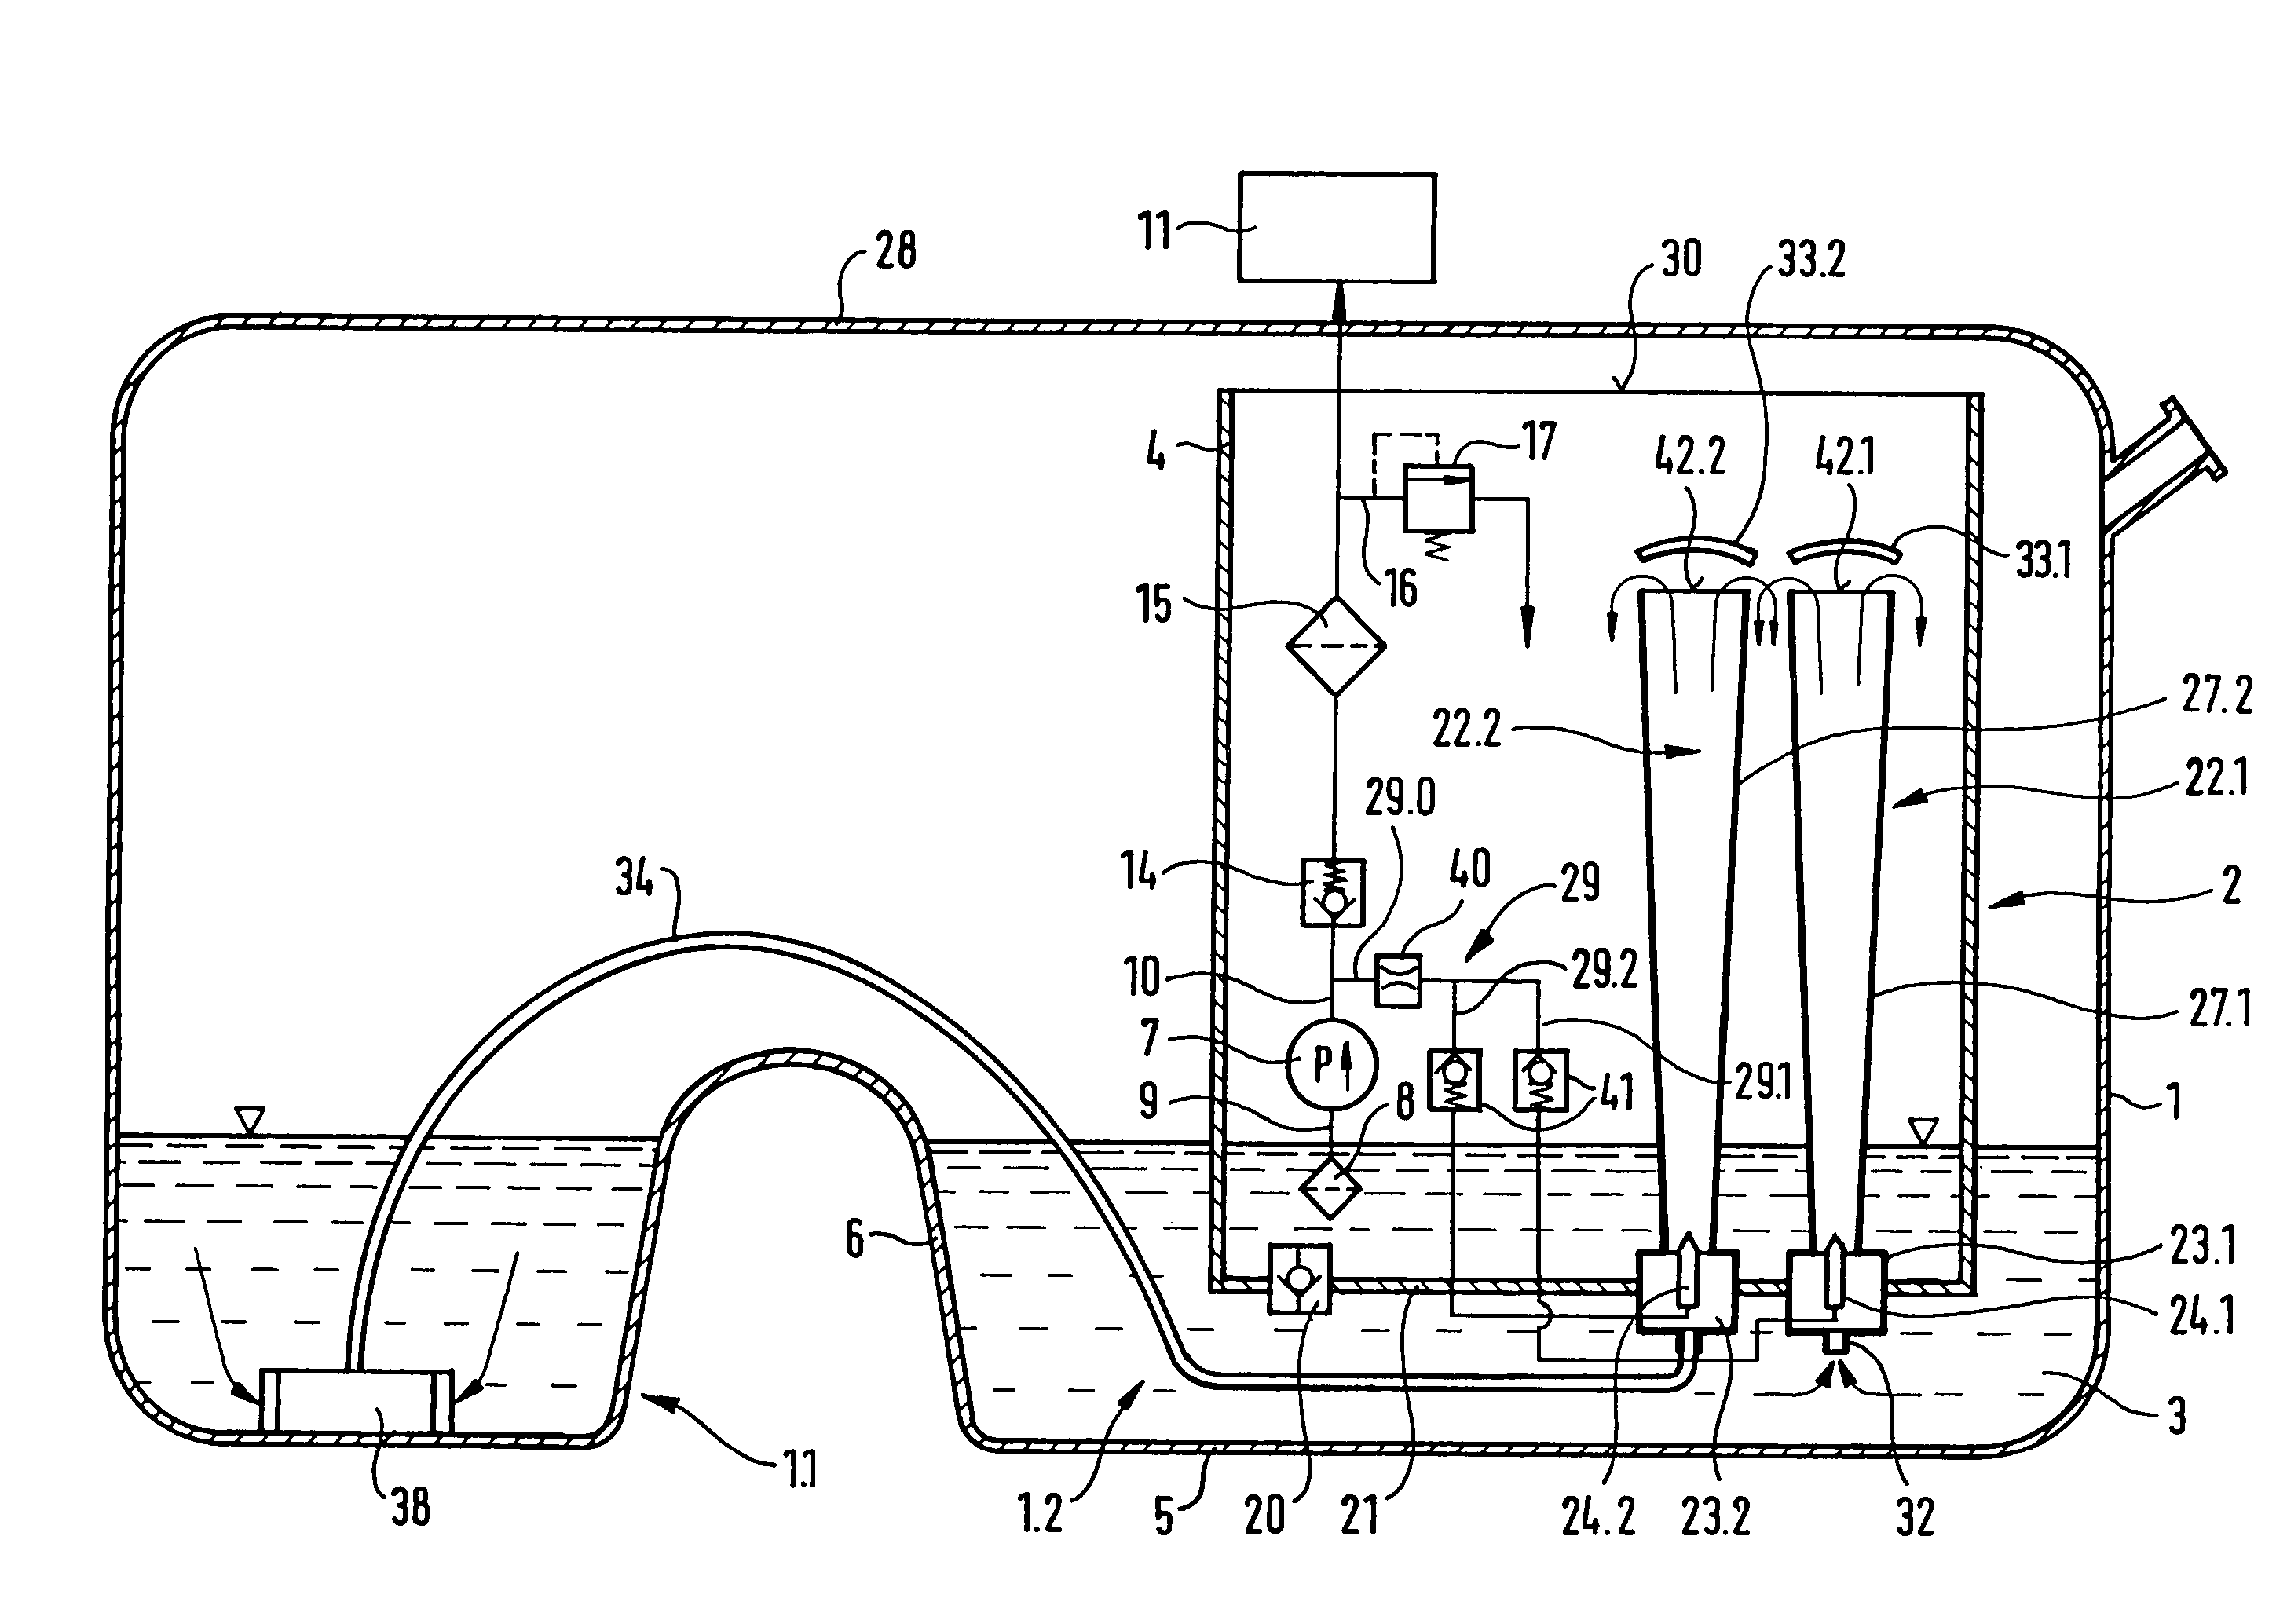 Apparatus for delivering fuel from a tank to an internal combustion engine